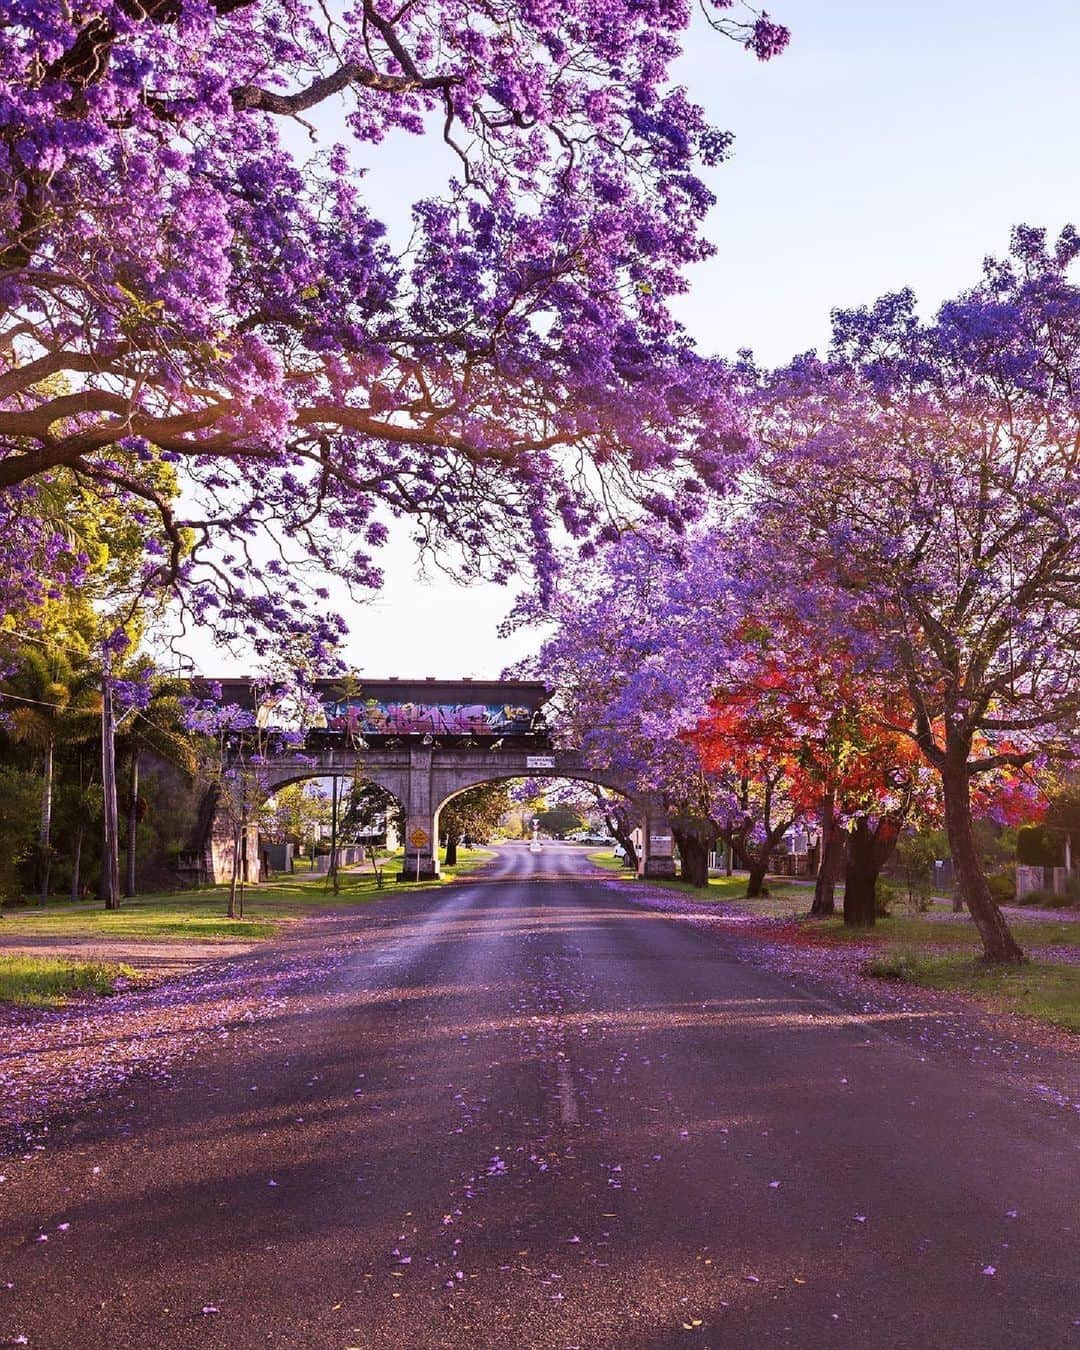 Australiaのインスタグラム：「Purple rain, purple rain 🎶 We never tire of the colours of #Jacaranda season 💜. These towering trees deliver a splash of lilac to #Australia every spring, with places like #Grafton becoming a hot spot for capturing colourful snaps (such as this one by @sharyn.coffee). If you fancy a road trip to make the most of sights like this, Warrane (@sydney) to @myclarencevalley is one of the best! Wander the lush @royalbotanicgardenssydney and @therocks for a dose of colour, before jumping in the car for a 7-hour #roadtrip along the @visitnsw North Coast. Check out our link in bio for more flower-filled itineraries 🌼👆  (📸: @sharyn.coffee)  #SeeAustralia #ComeAndSayGday #FeelNSW #MyClarenceValley  ID: A wide road lined on both sides by purple jacaranda trees, with the sun streaming through and a rain crossing a bridge up ahead.」